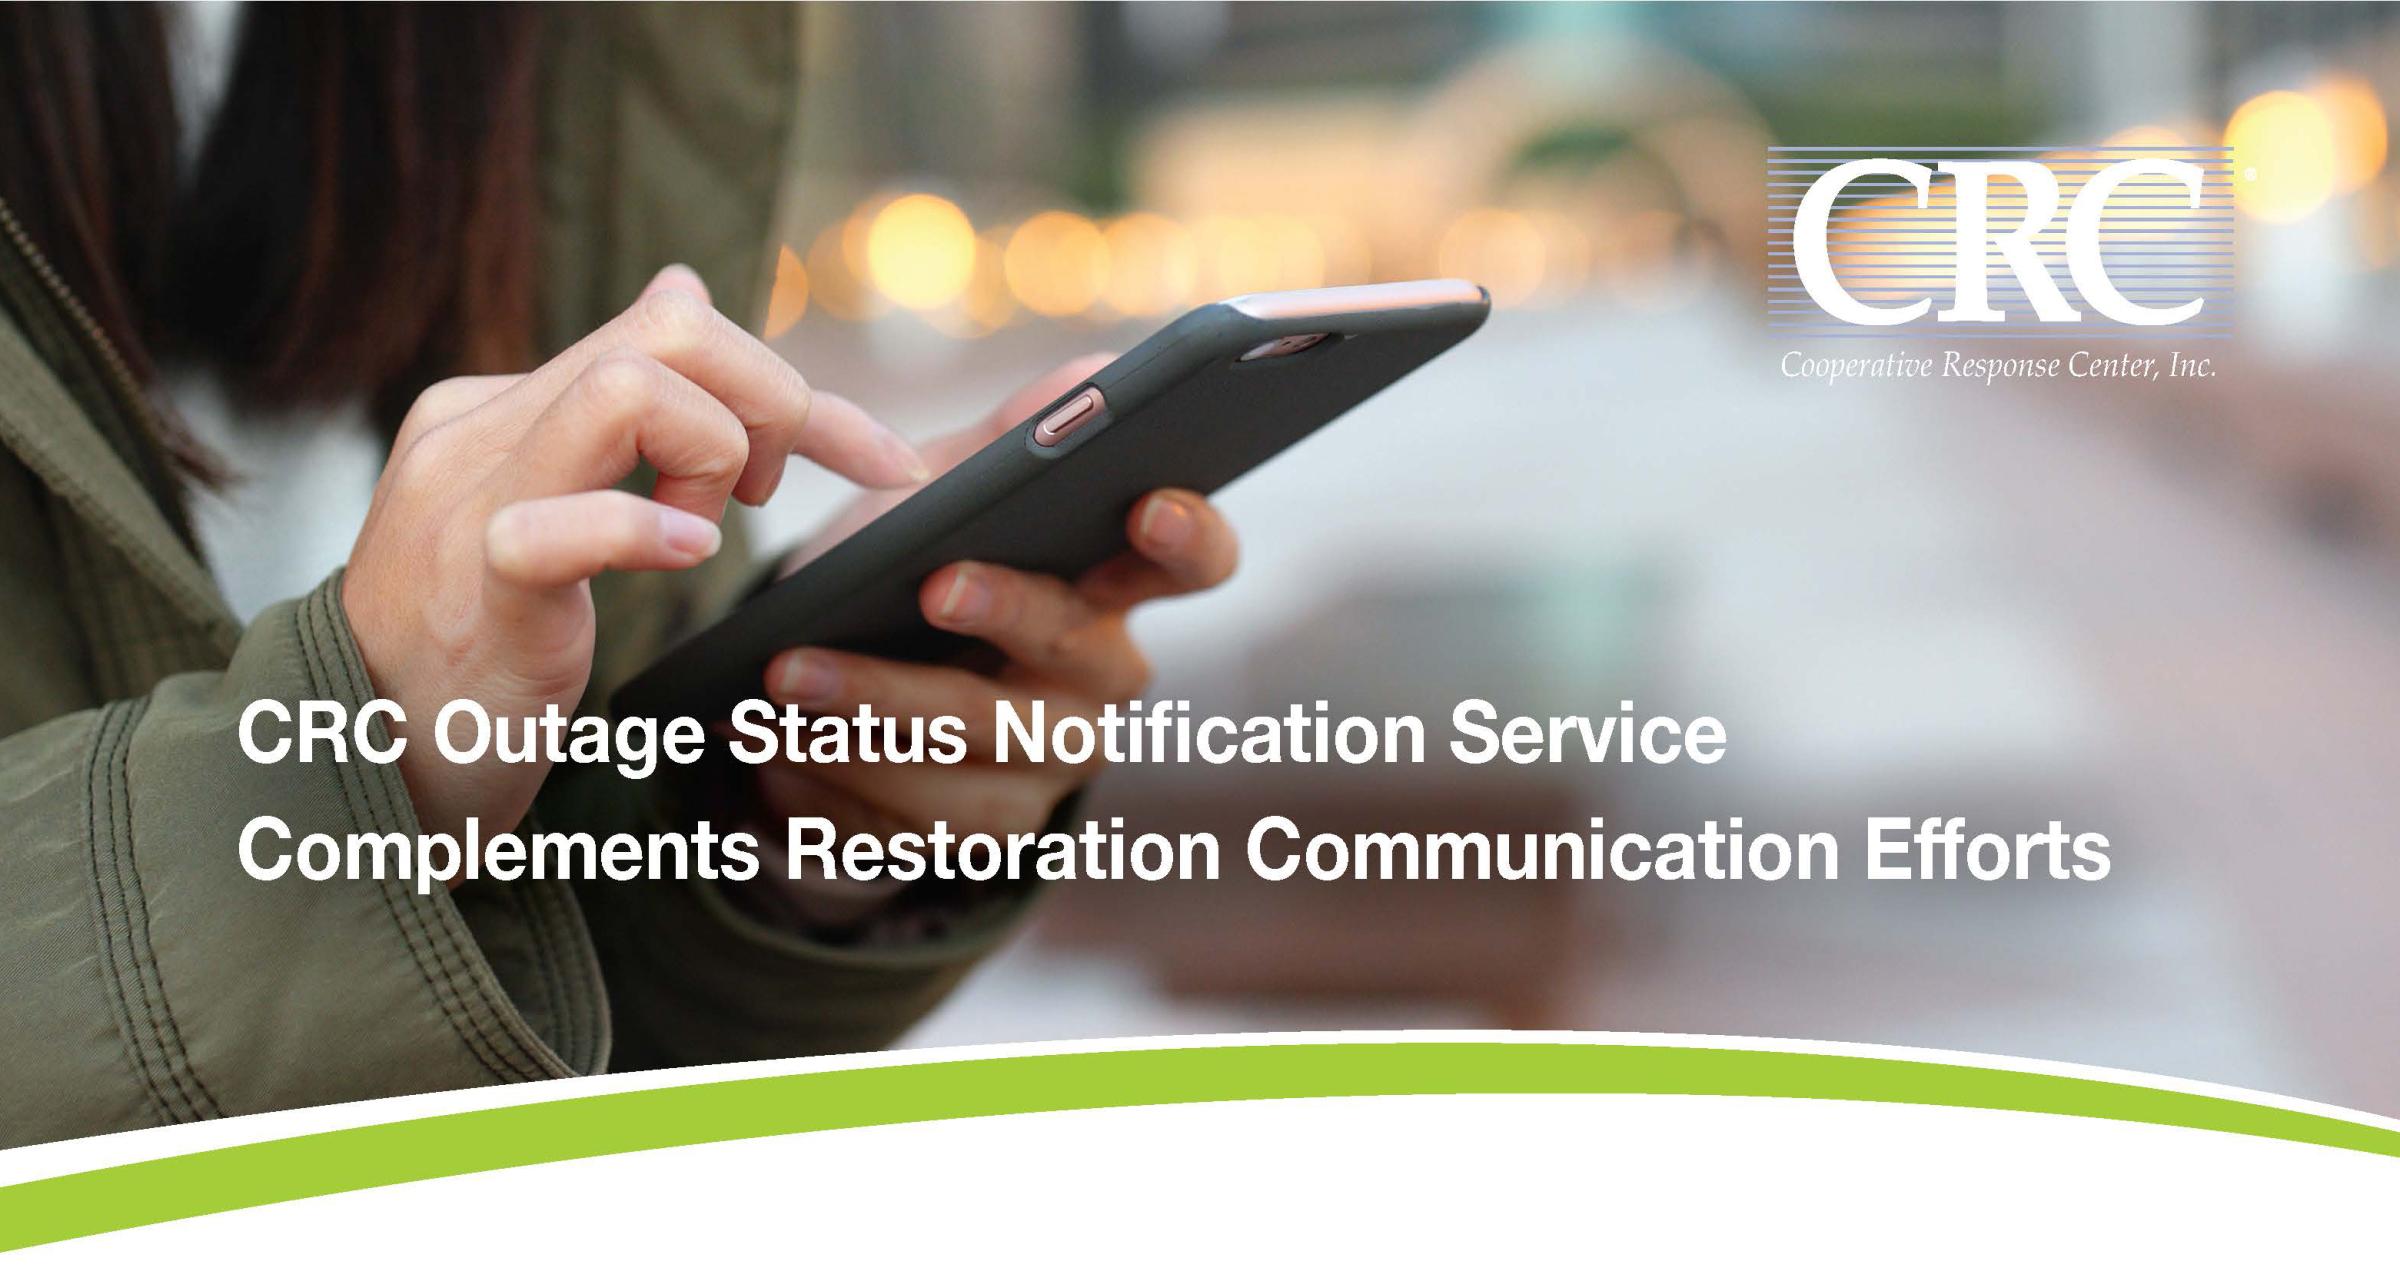 CRC Outage Status Notification Service Complements Restoration Communication Efforts